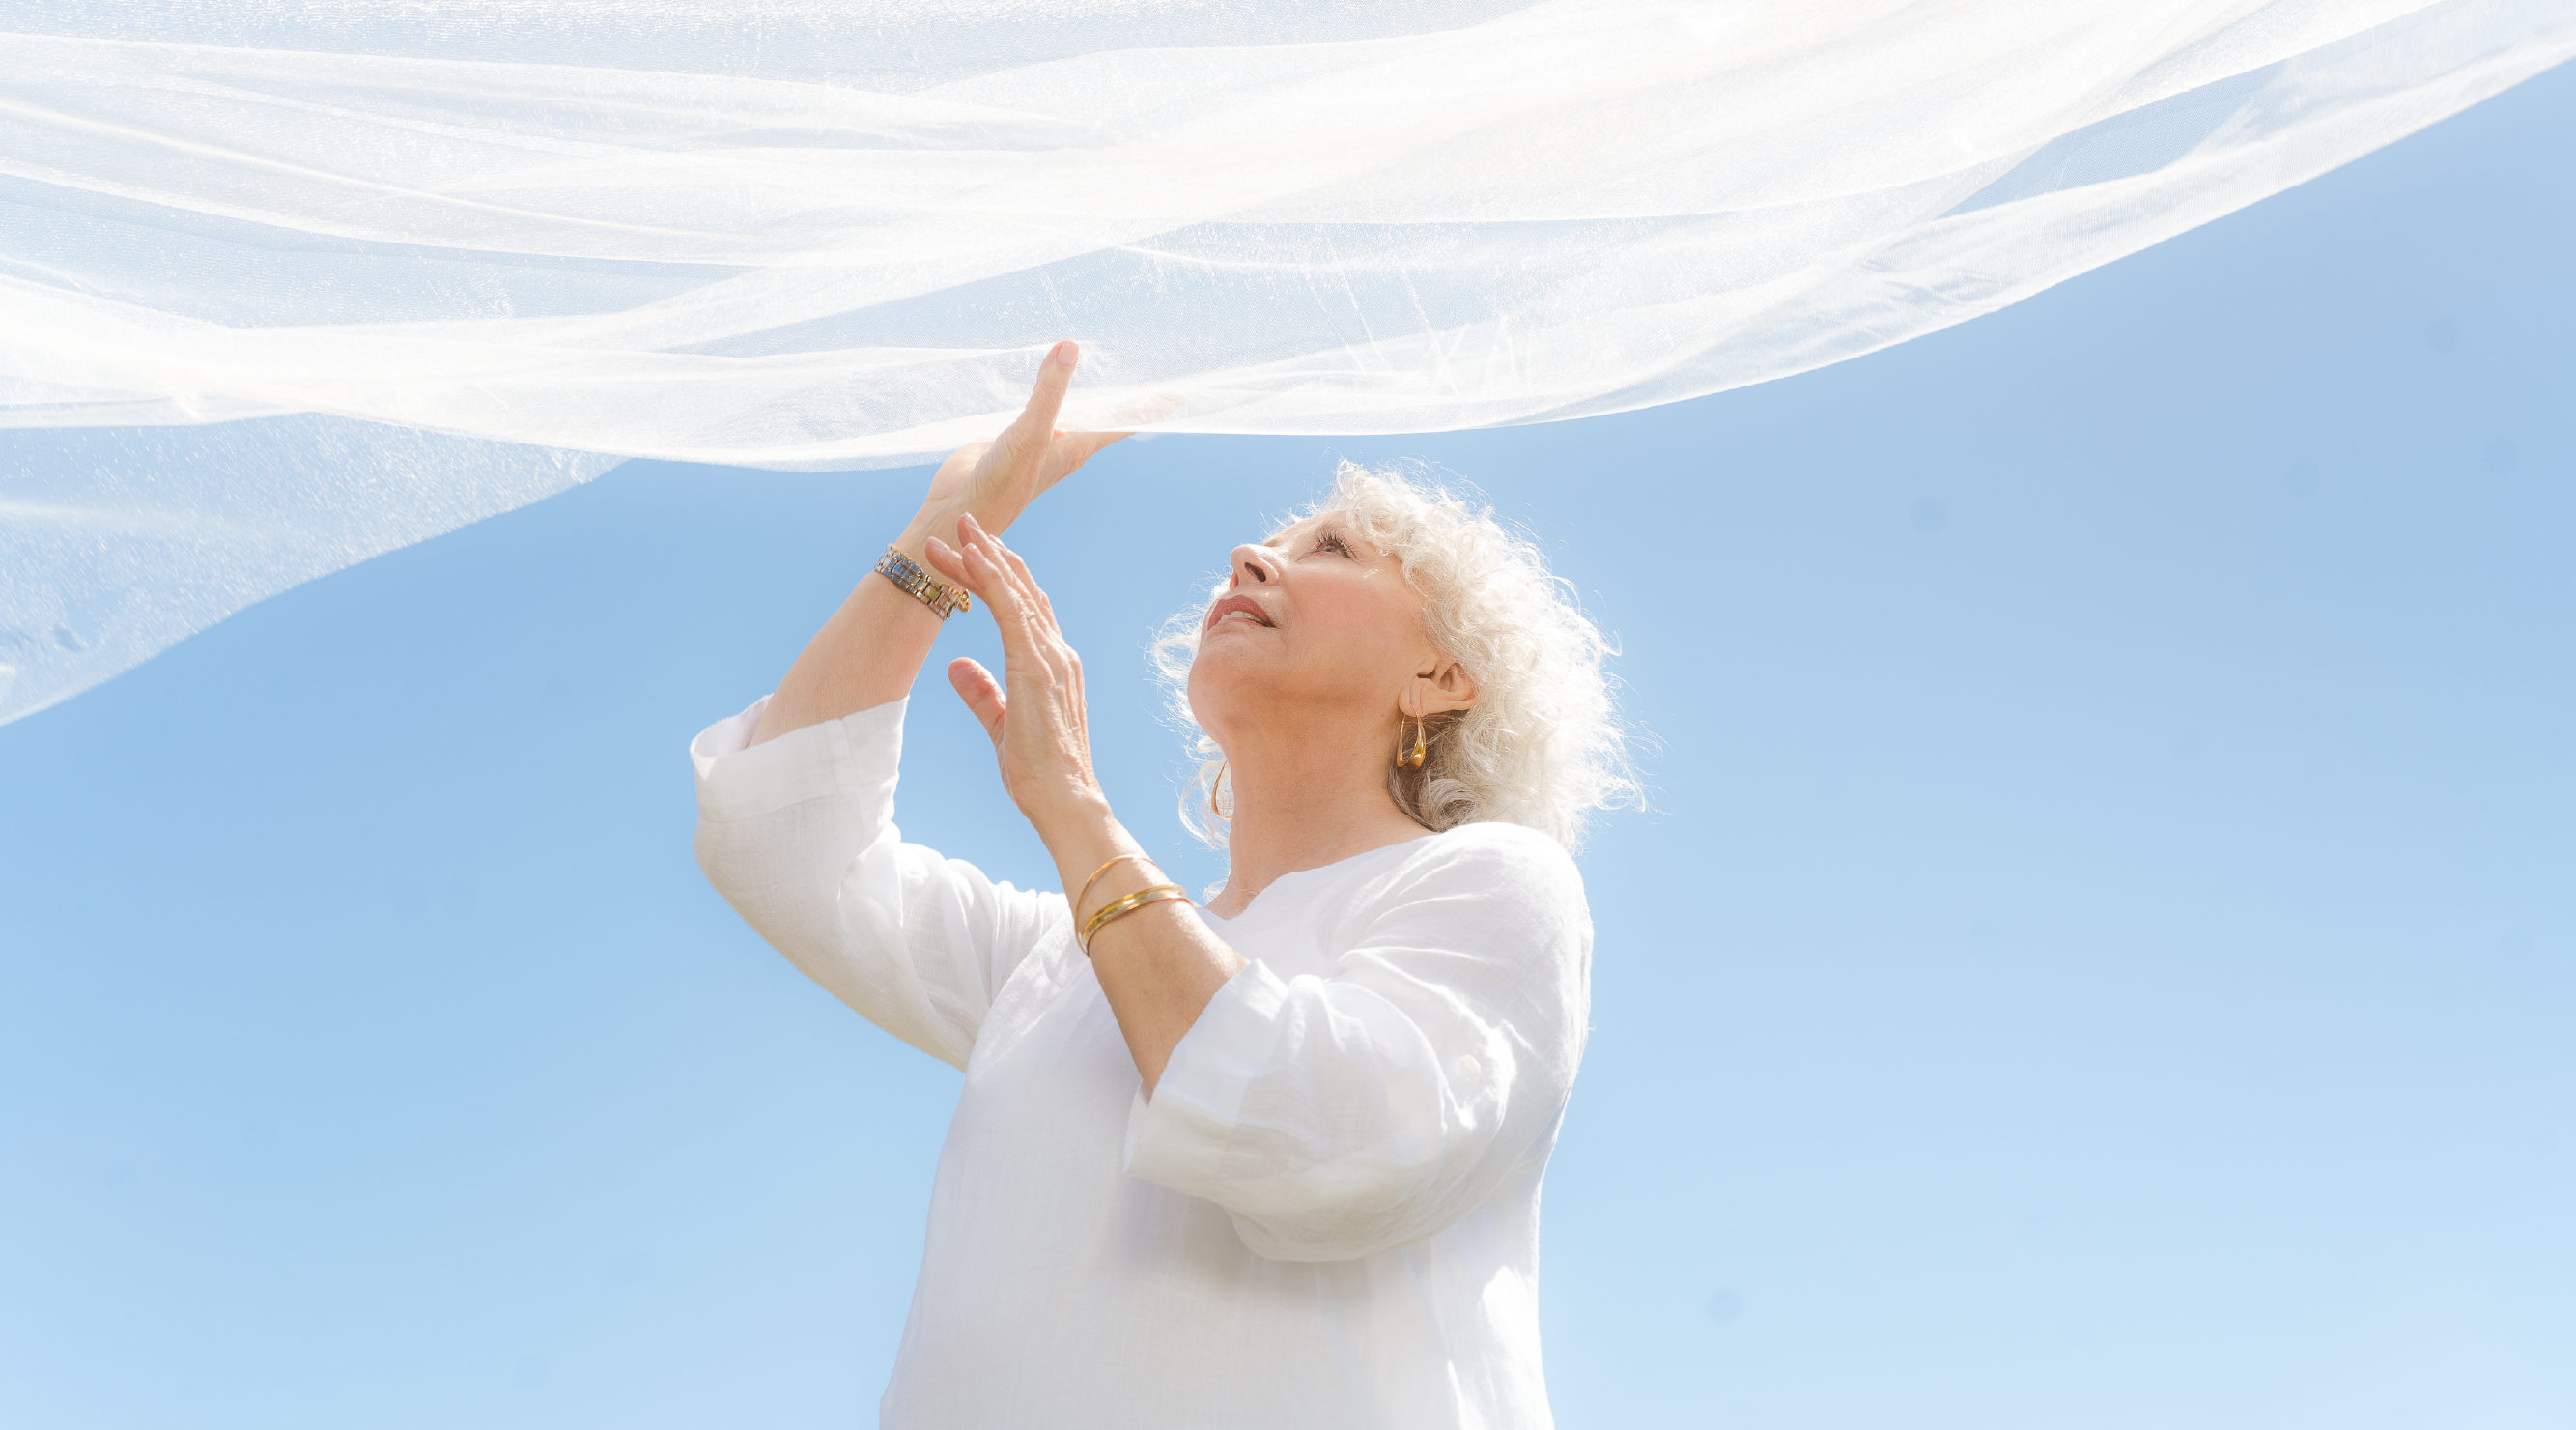 Nevaeh Day Spa. Woman with grey curly hair wearing all white reaching up to wispy white fabric flowing in the wind with blue skies behind her.